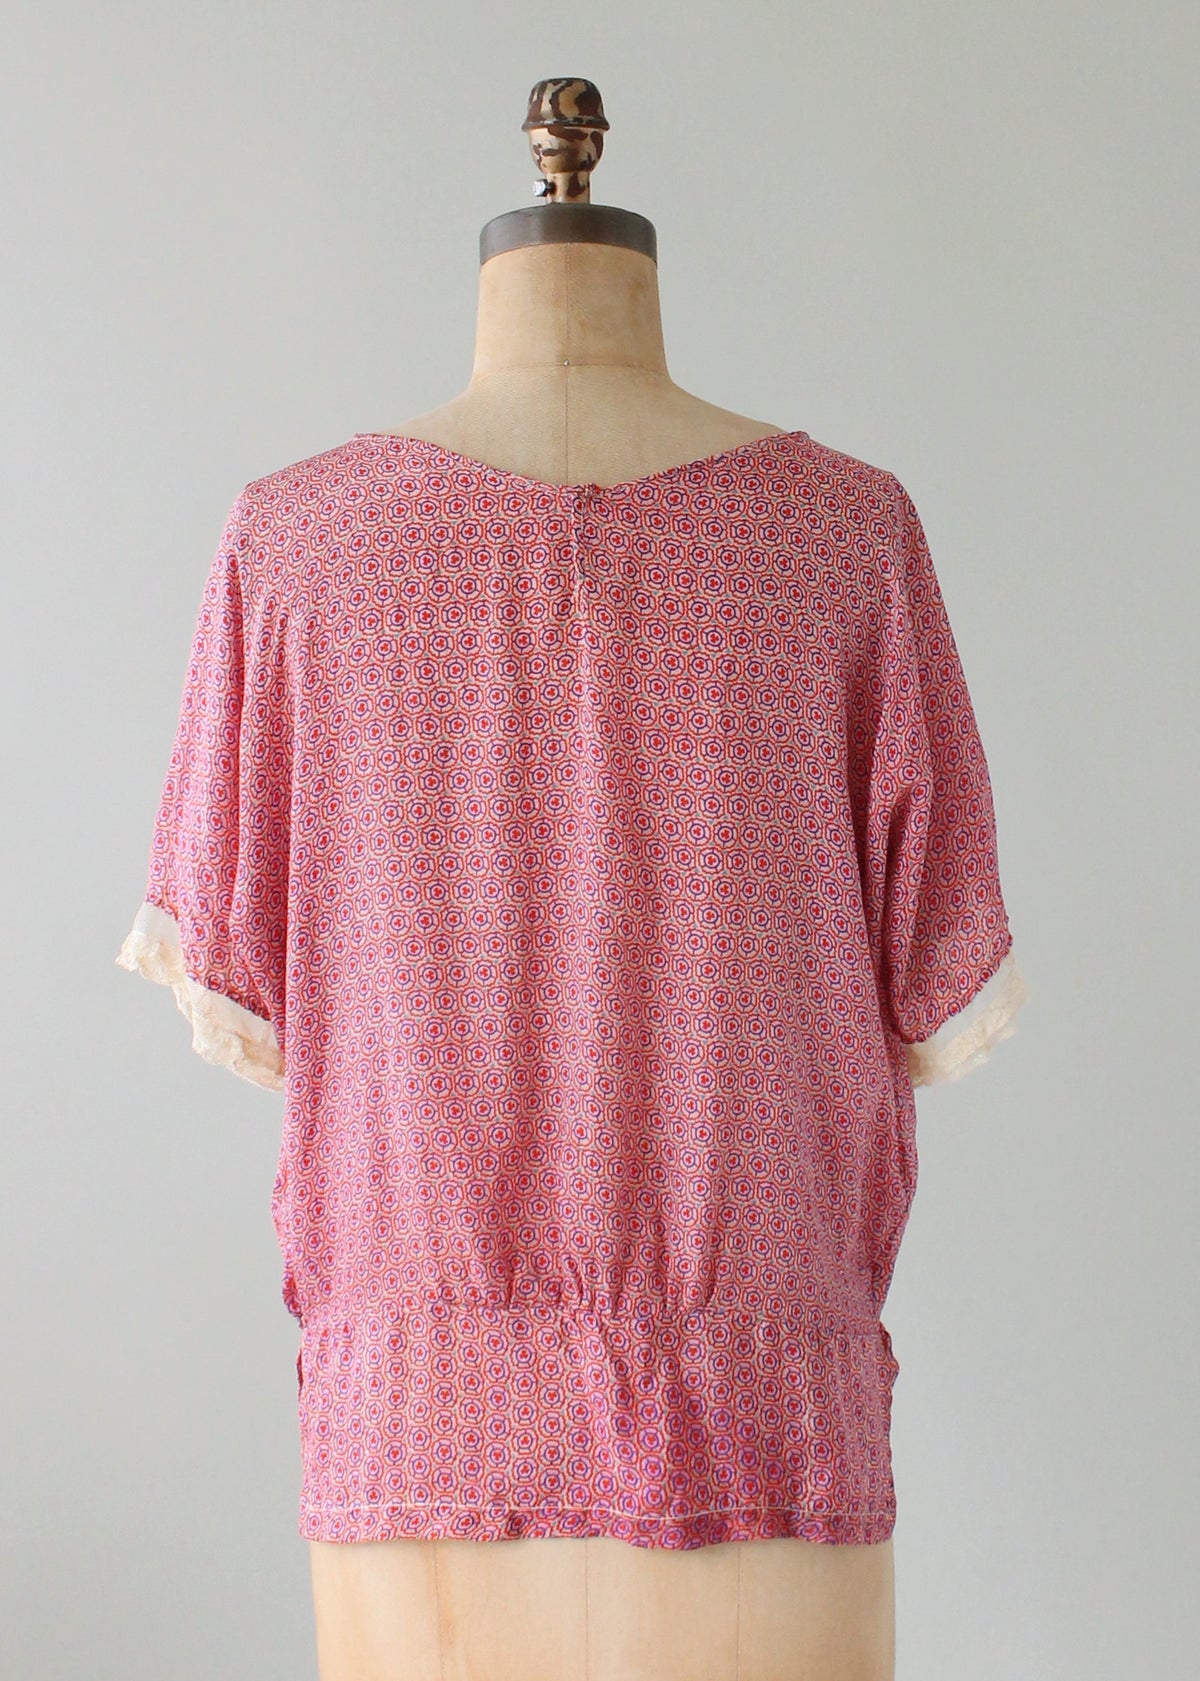 Vintage 1920s Pink Print Silk and Lace Blouse - Raleigh Vintage